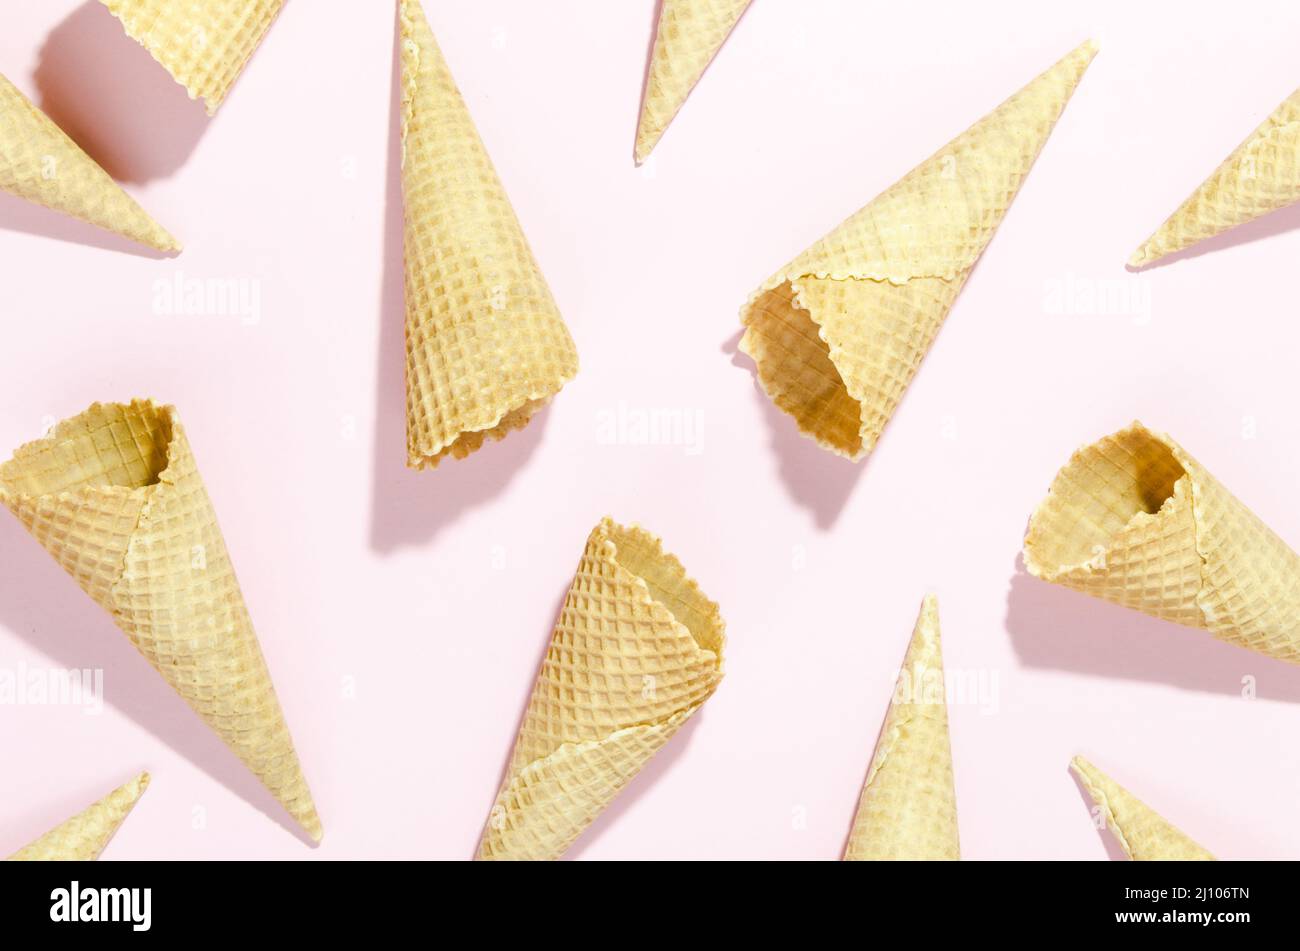 Empty waffle cones scattered table Stock Photo